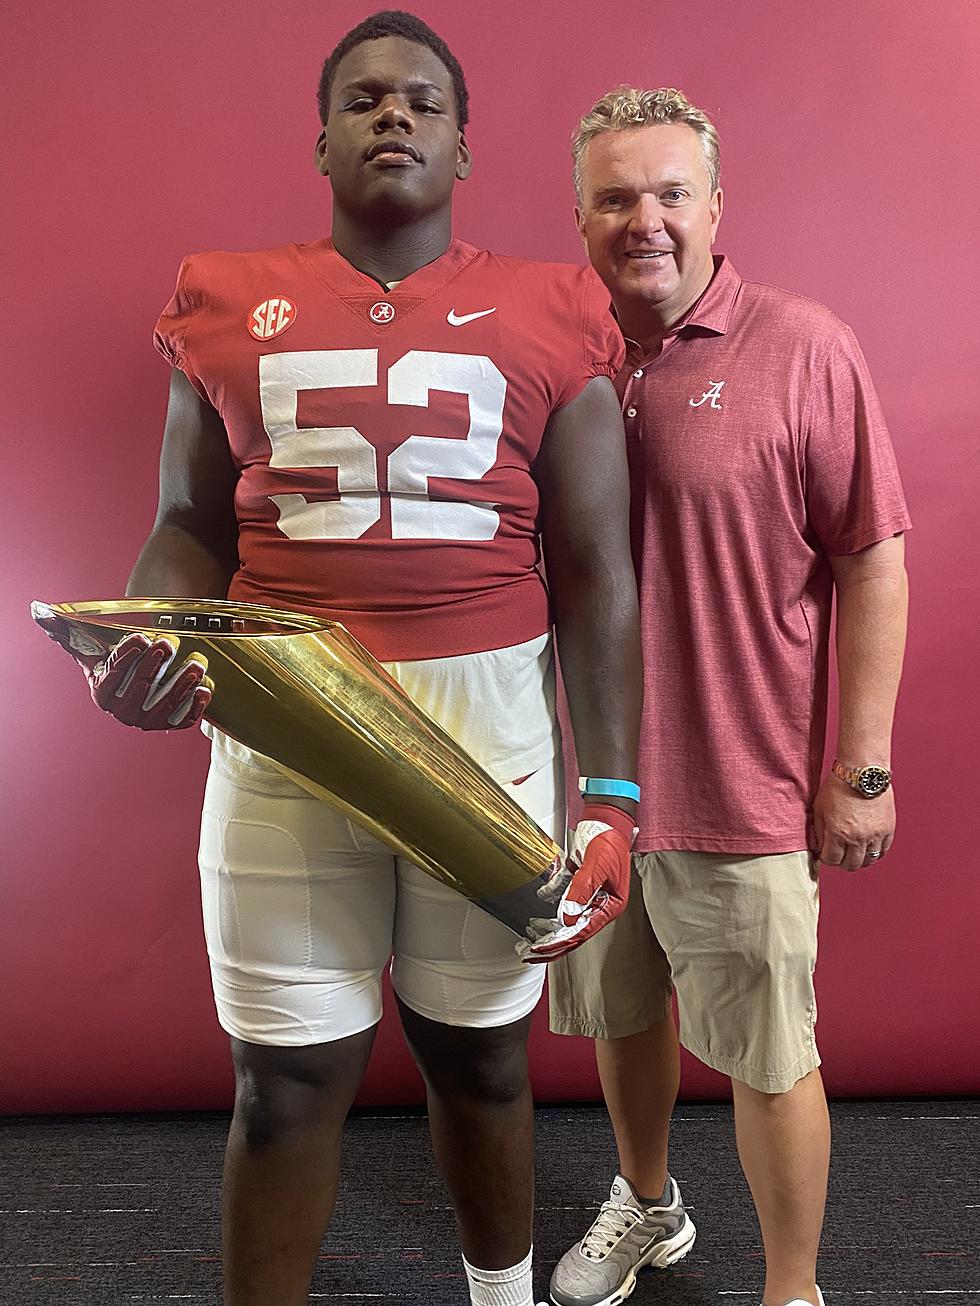 2026 OL Decommits from Alabama